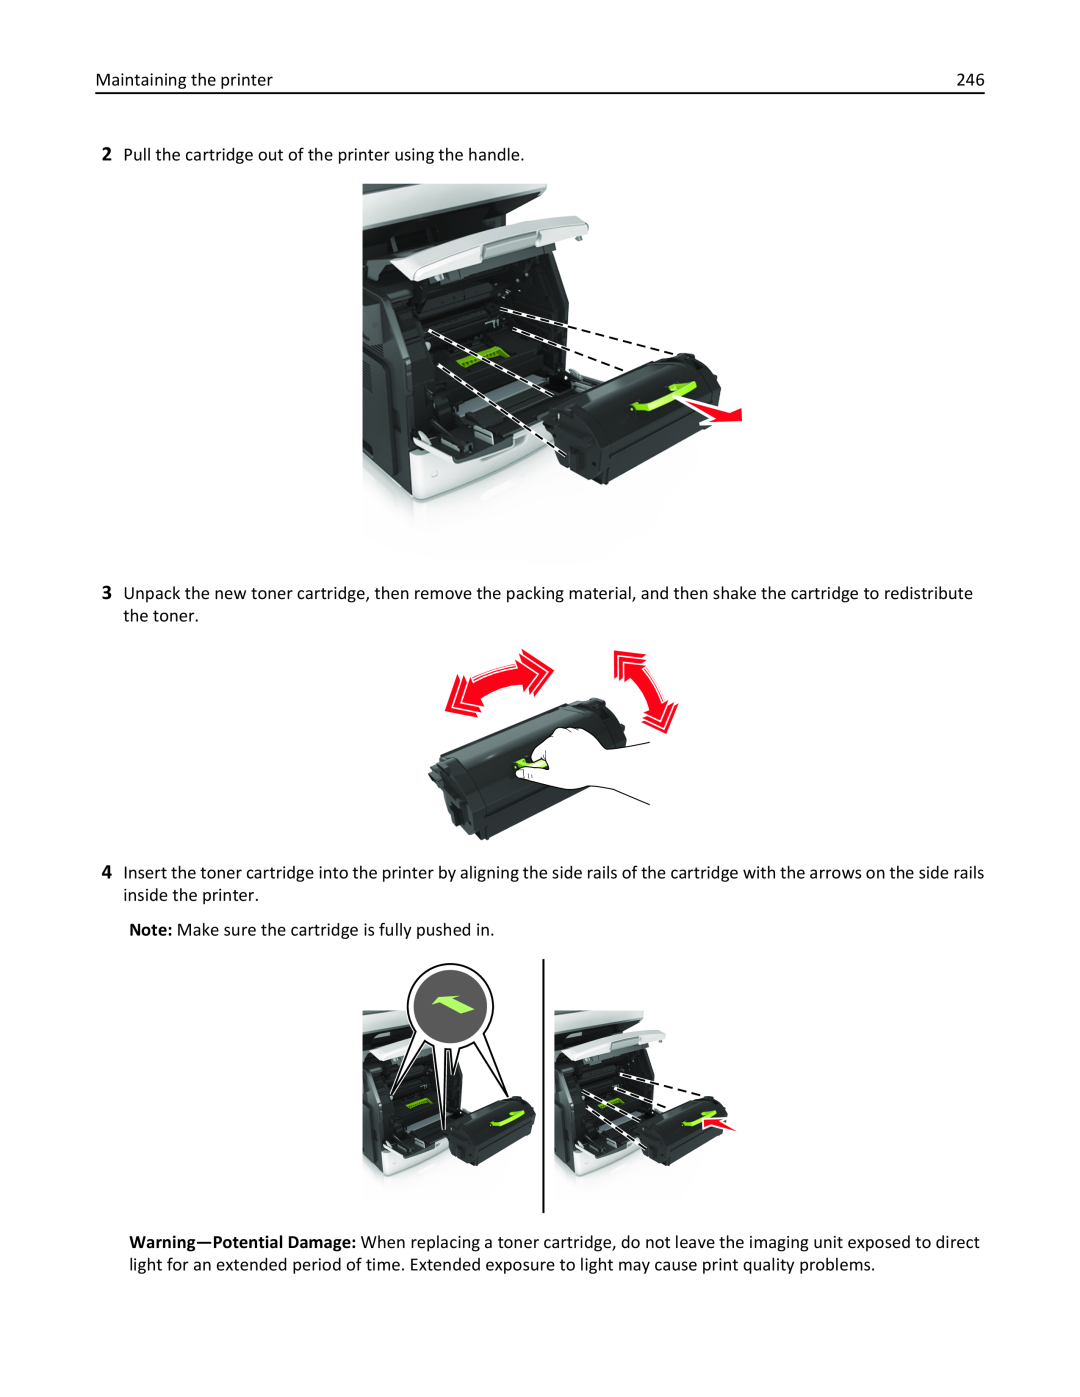 Lexmark MX710DHE, 24T7310, 237, 037 manual Maintaining the printer, Pull the cartridge out of the printer using the handle 